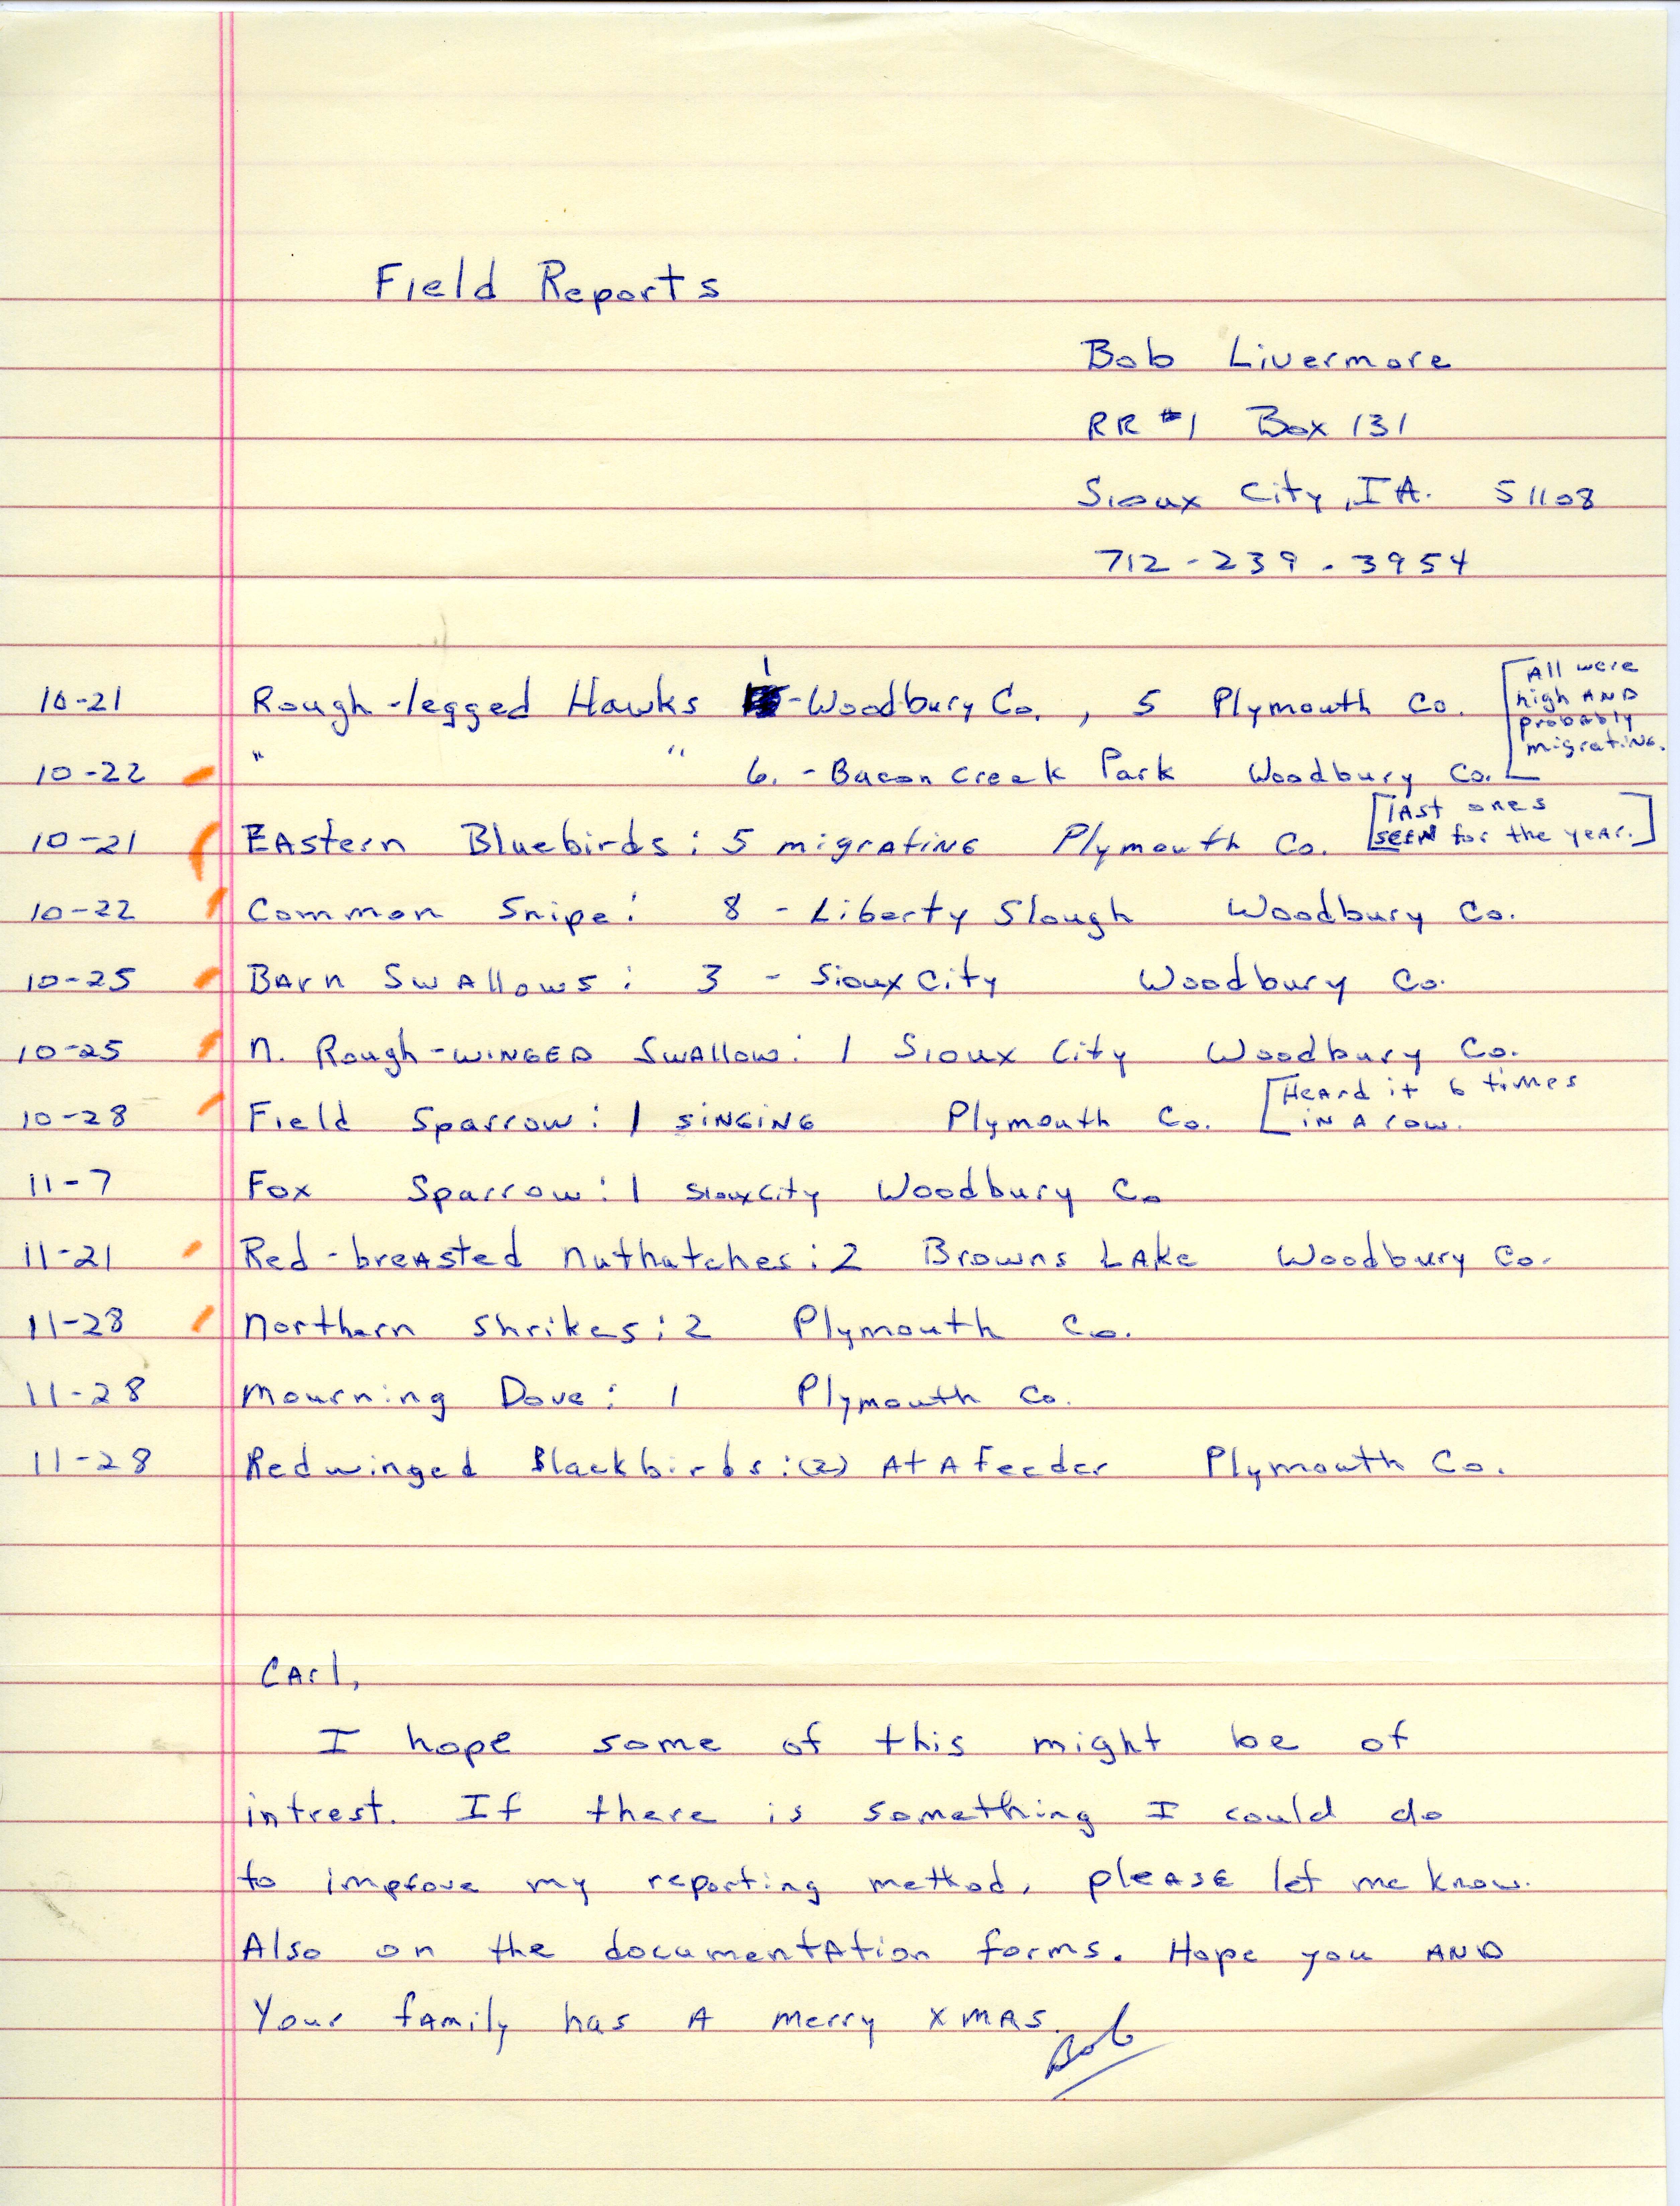 Field reports and letter to Carl J. Bendorf contributed by Bob Livermore, fall 1987